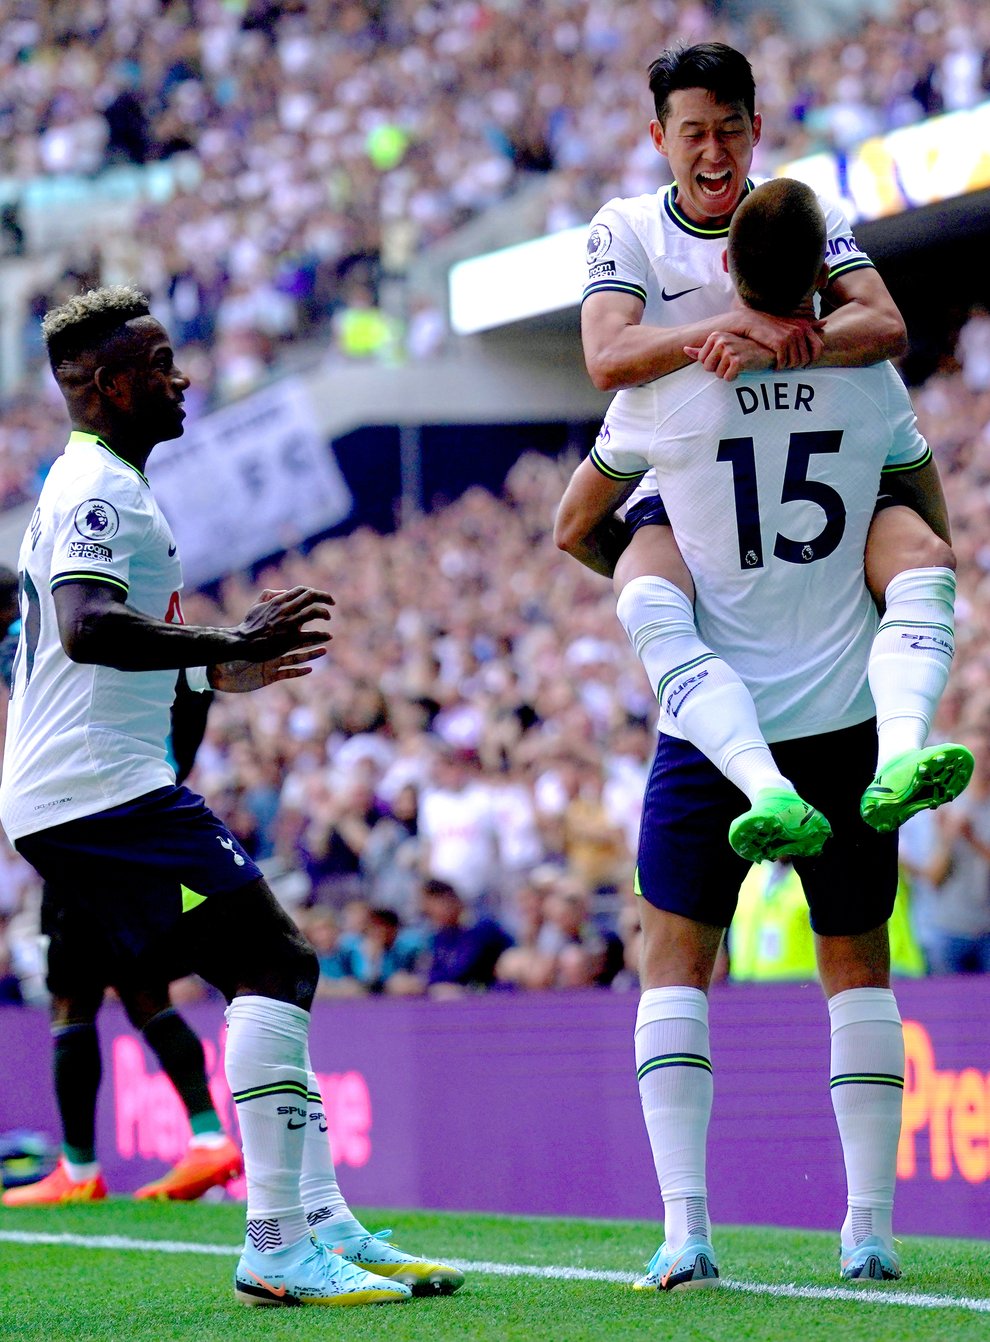 Tottenham players celebrate after Eric Dier puts them 2-1 up against Southampton (Kirsty O’Connor/PA)